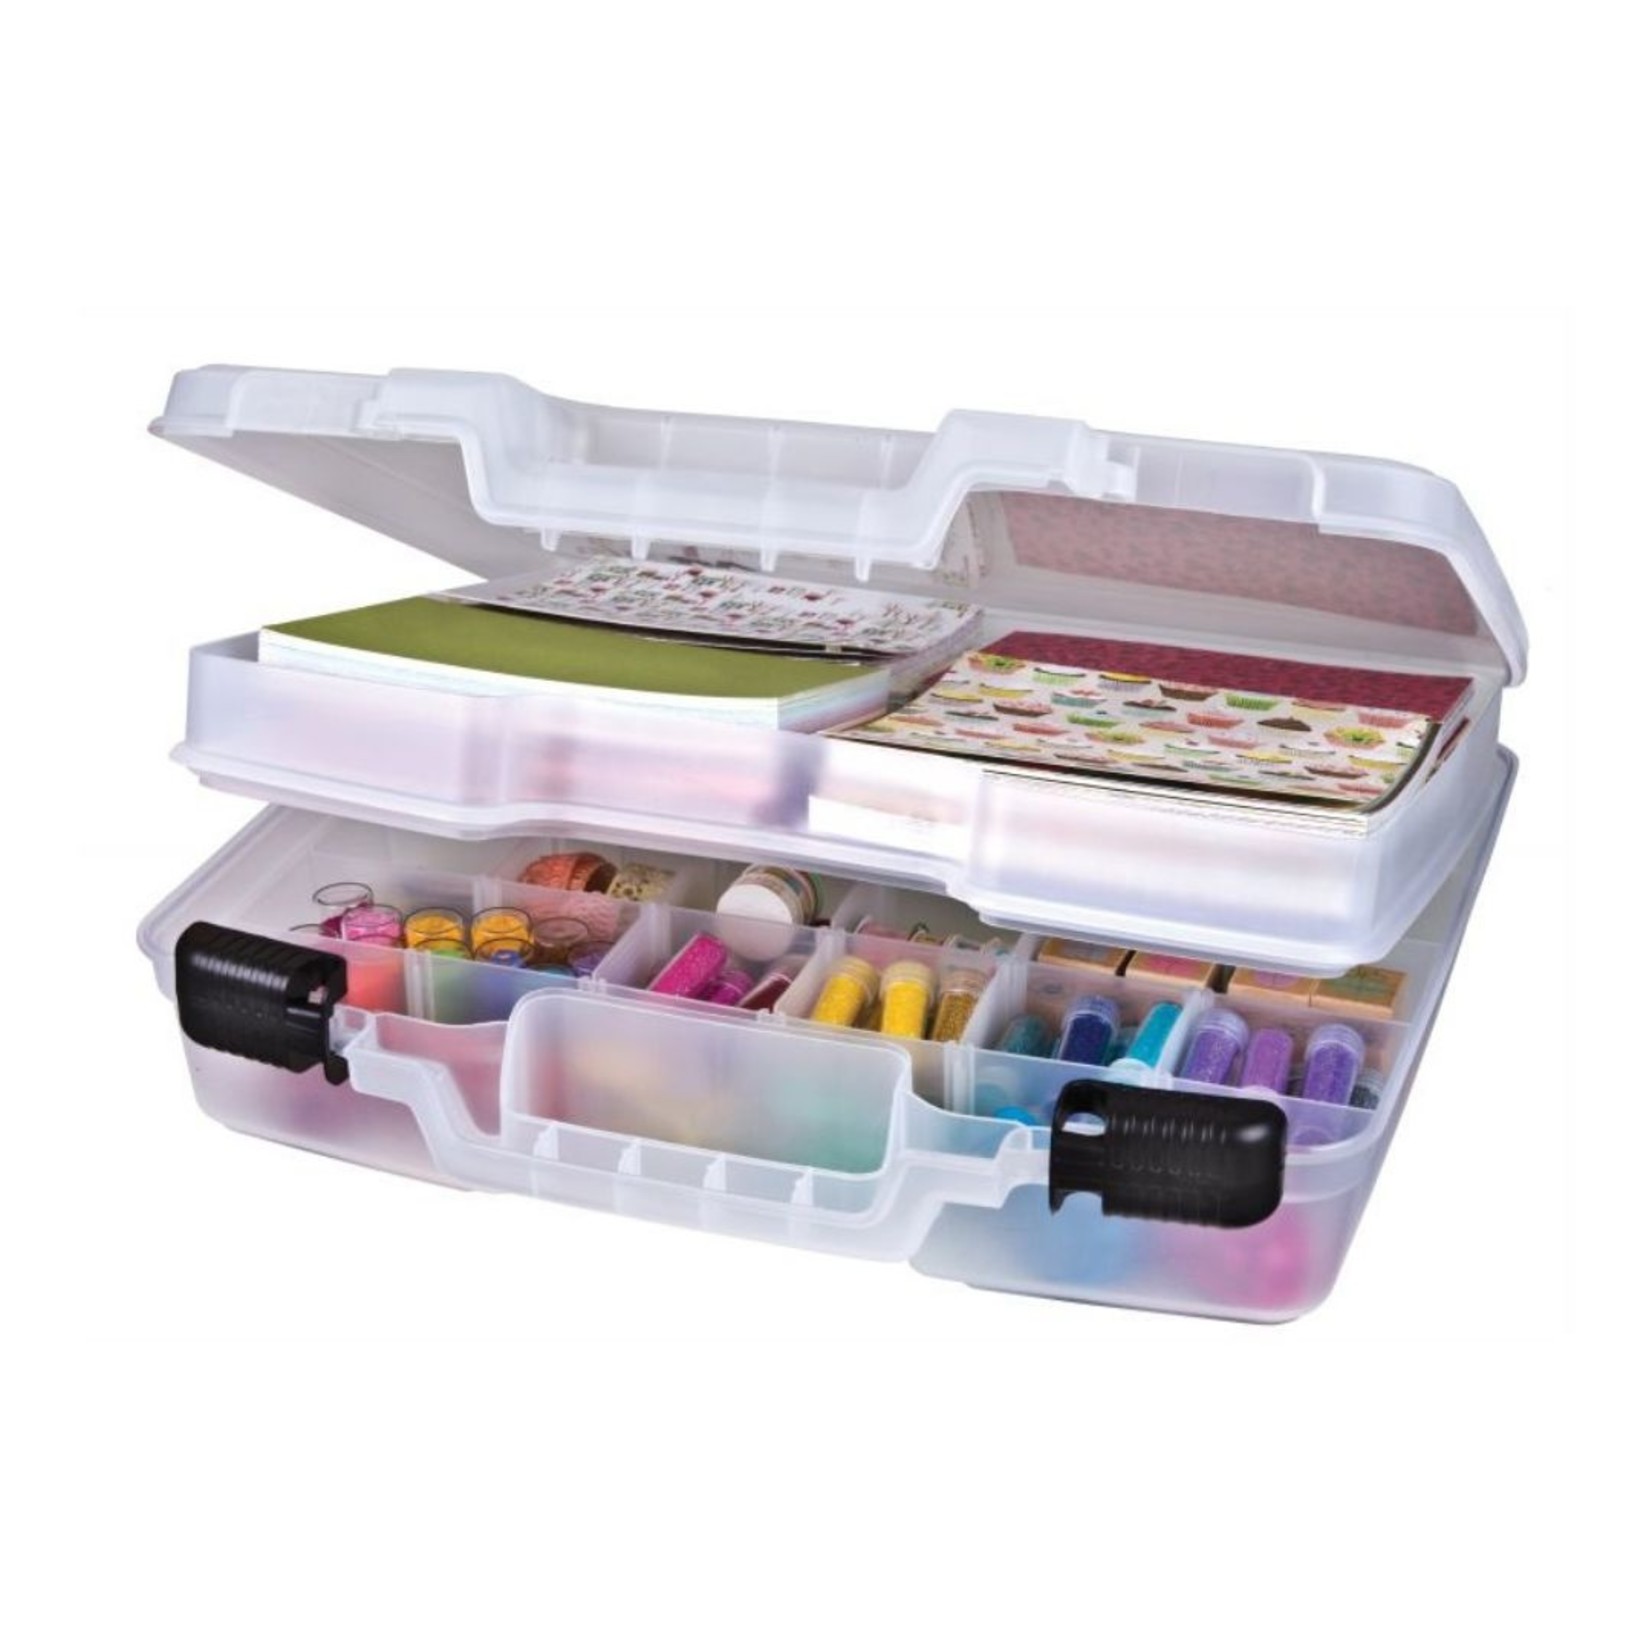 ARTBIN ARTBIN QUICKVIEW 15" DIVIDED BOX WITH TRAY